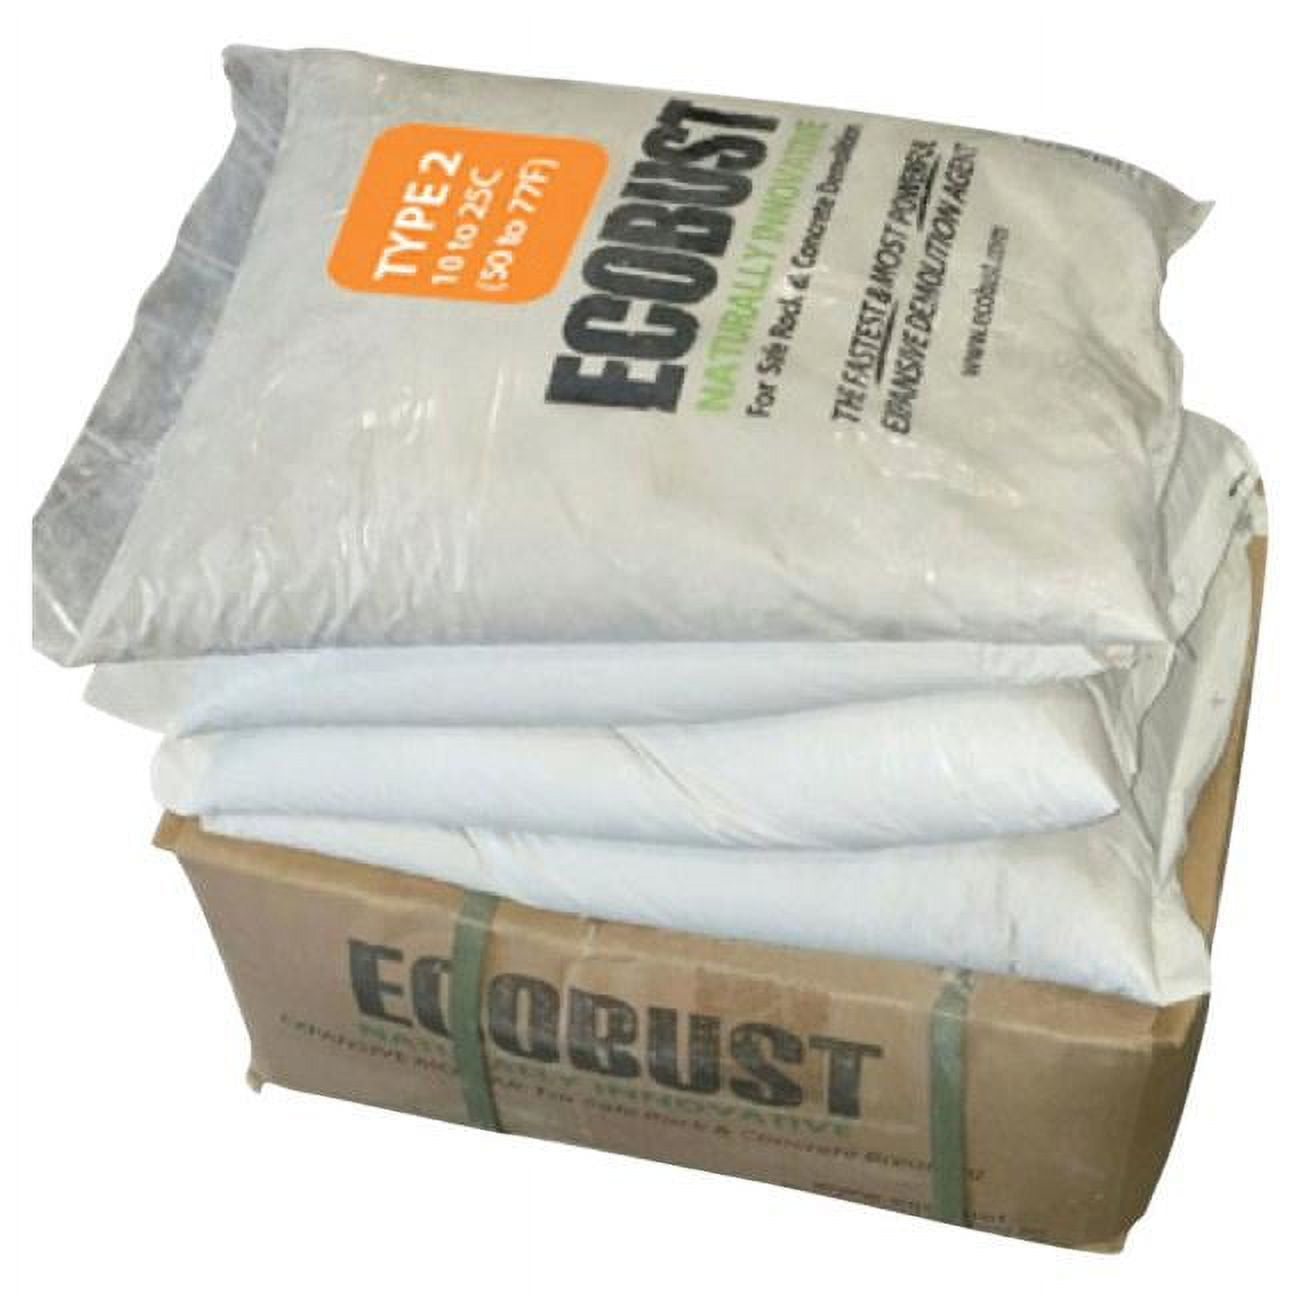 Picture of Ecobust 5006111 11 lbs Type 2 50F to 77F Expansive Demolition Agent - Pack of 4